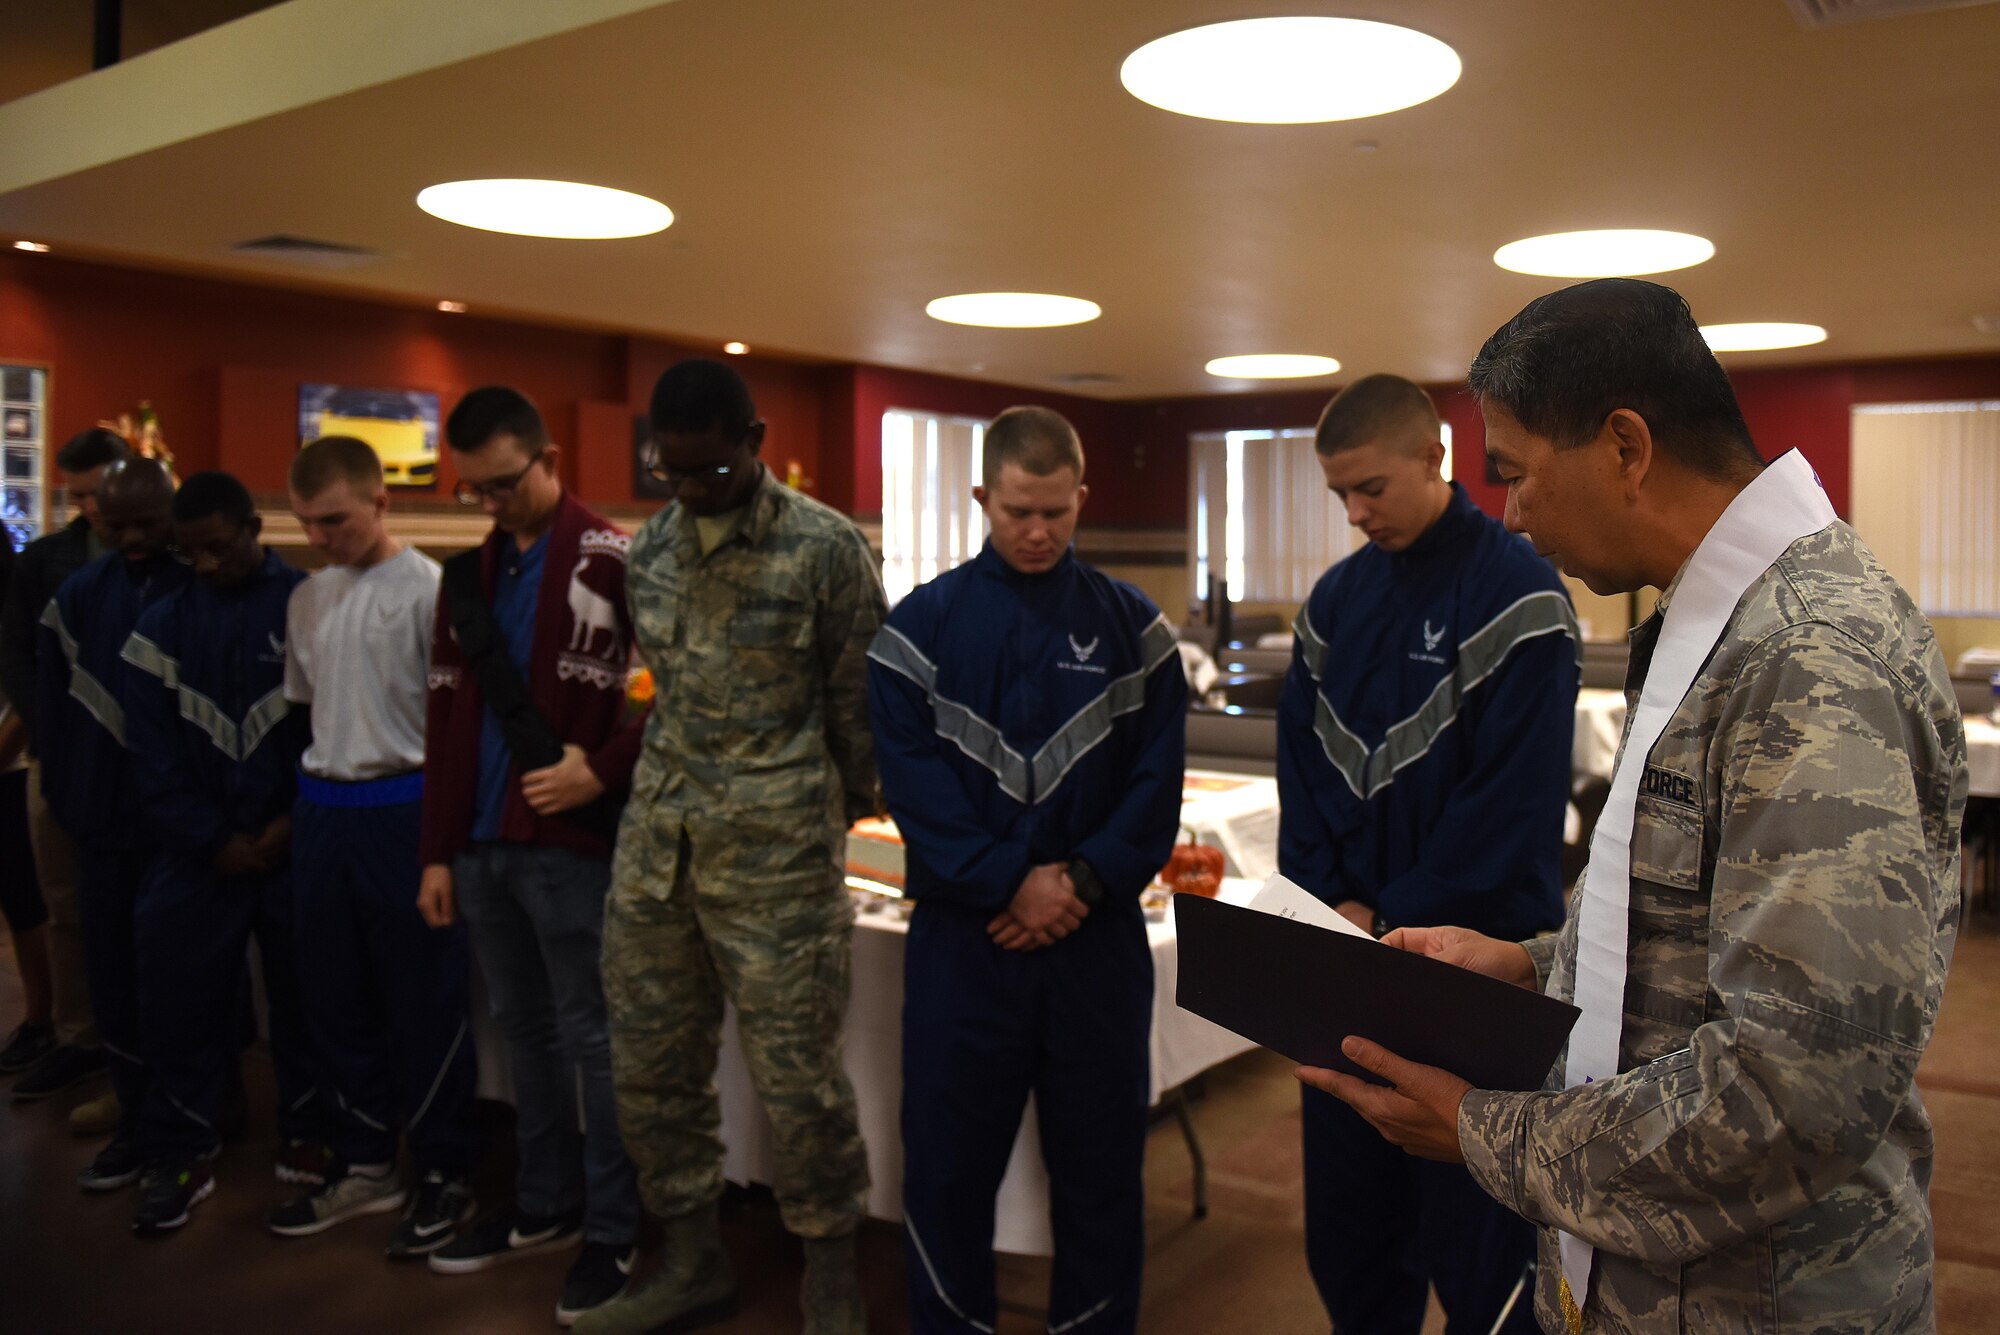 U.S. Air Force Chaplain (Capt.) Antonio Rigonan, 17th Training Wing, provides an opening prayer for Thanksgiving at the Cressman Dining Facility on Goodfellow Air Force Base, Texas, Nov. 24, 2016. Base leadership took turns serving service members, retirees and dependents for Thanksgiving. (U.S. Air Force photo by Airman 1st Class Caelynn Ferguson/Released)